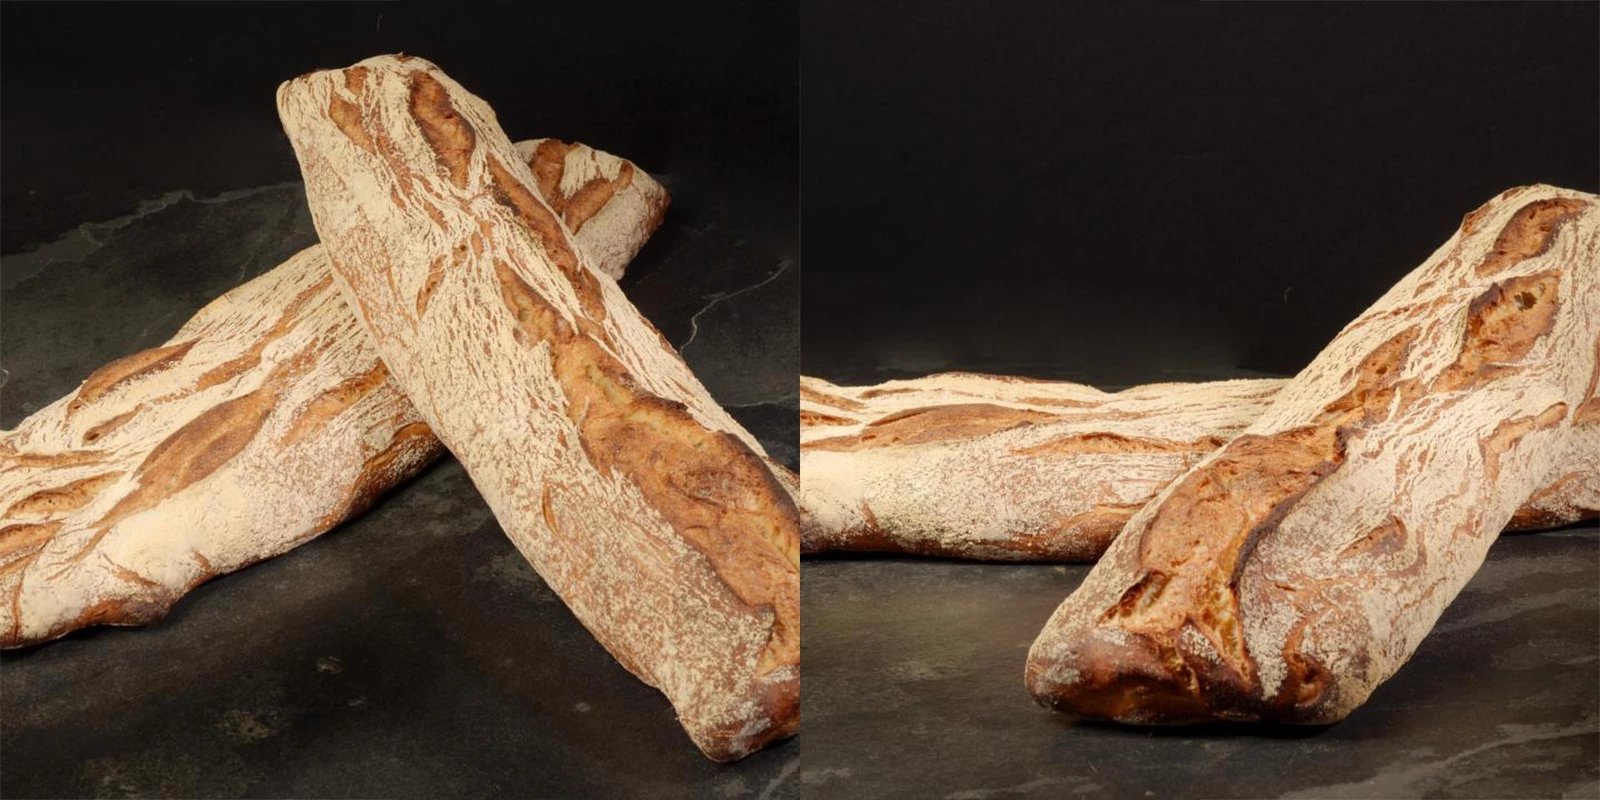 Recipe: Foricher's "Traverse" Loaf with T80 Flour